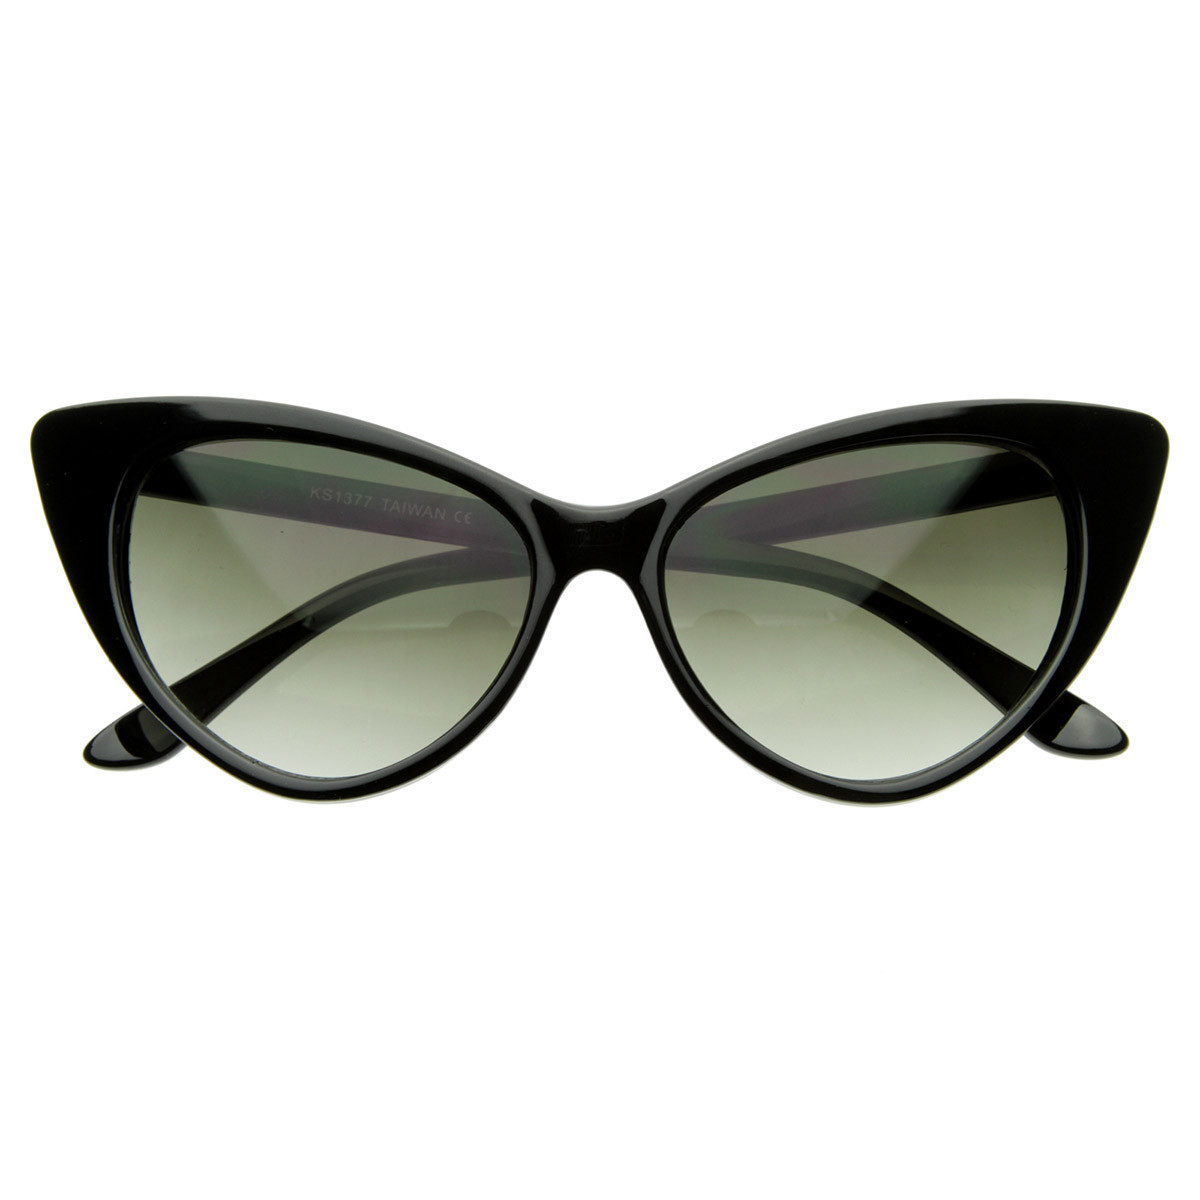 Super Cateyes Vintage Inspired Fashion Mod Chic High Pointed Cat-Eye Sunglasses - 8371 - Black / Gradient